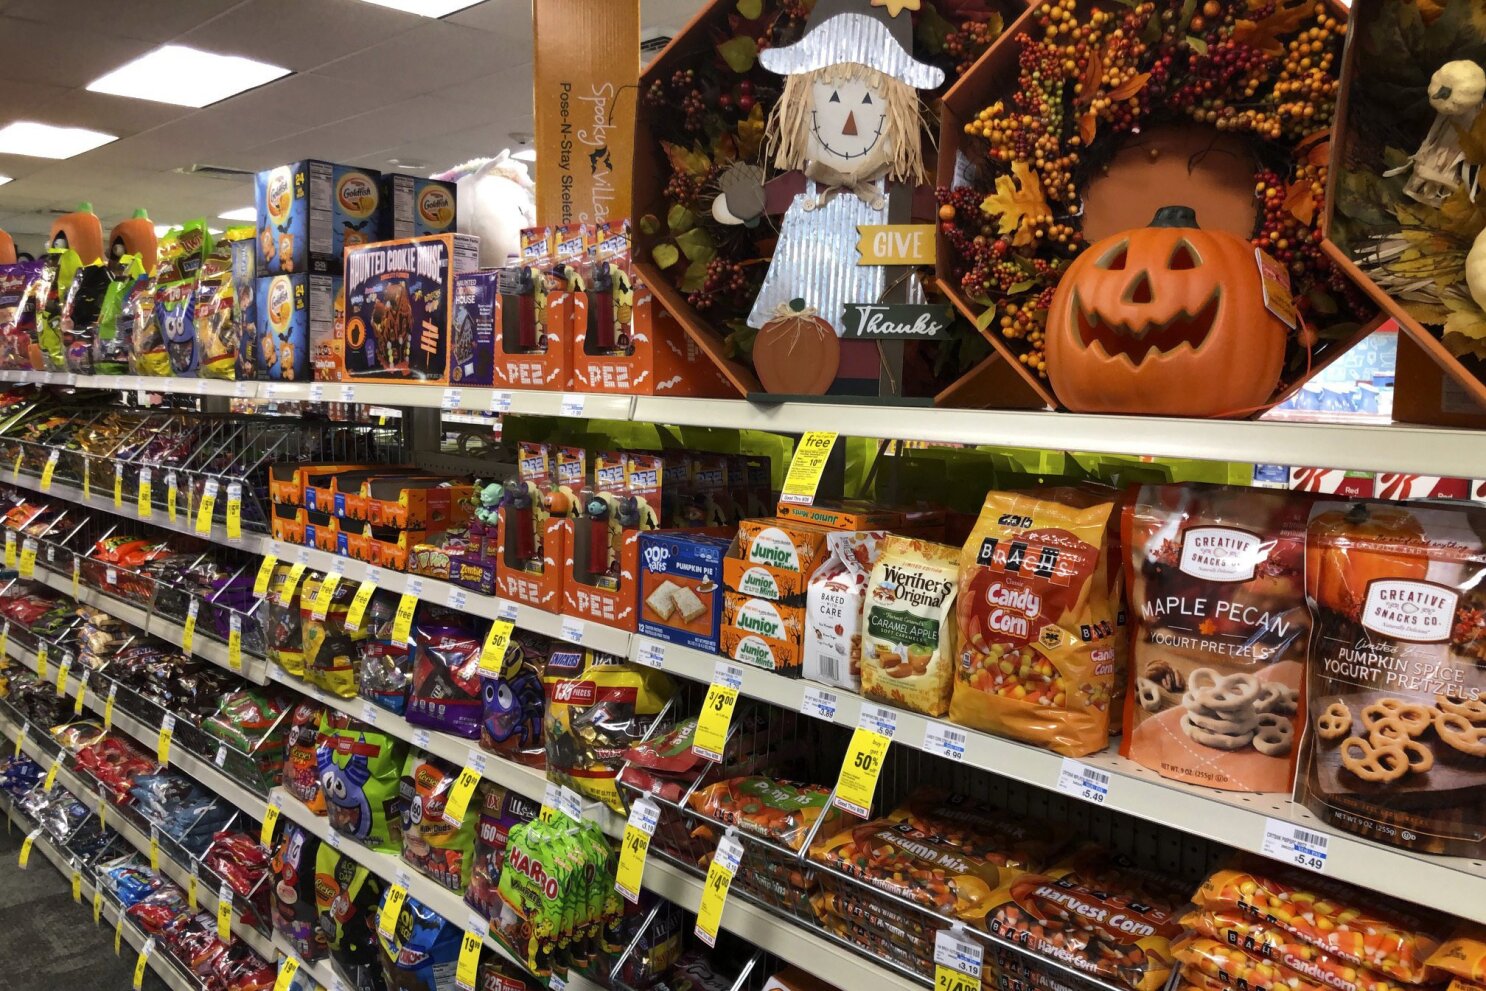 Americans load up on candy, trick or treat - or not